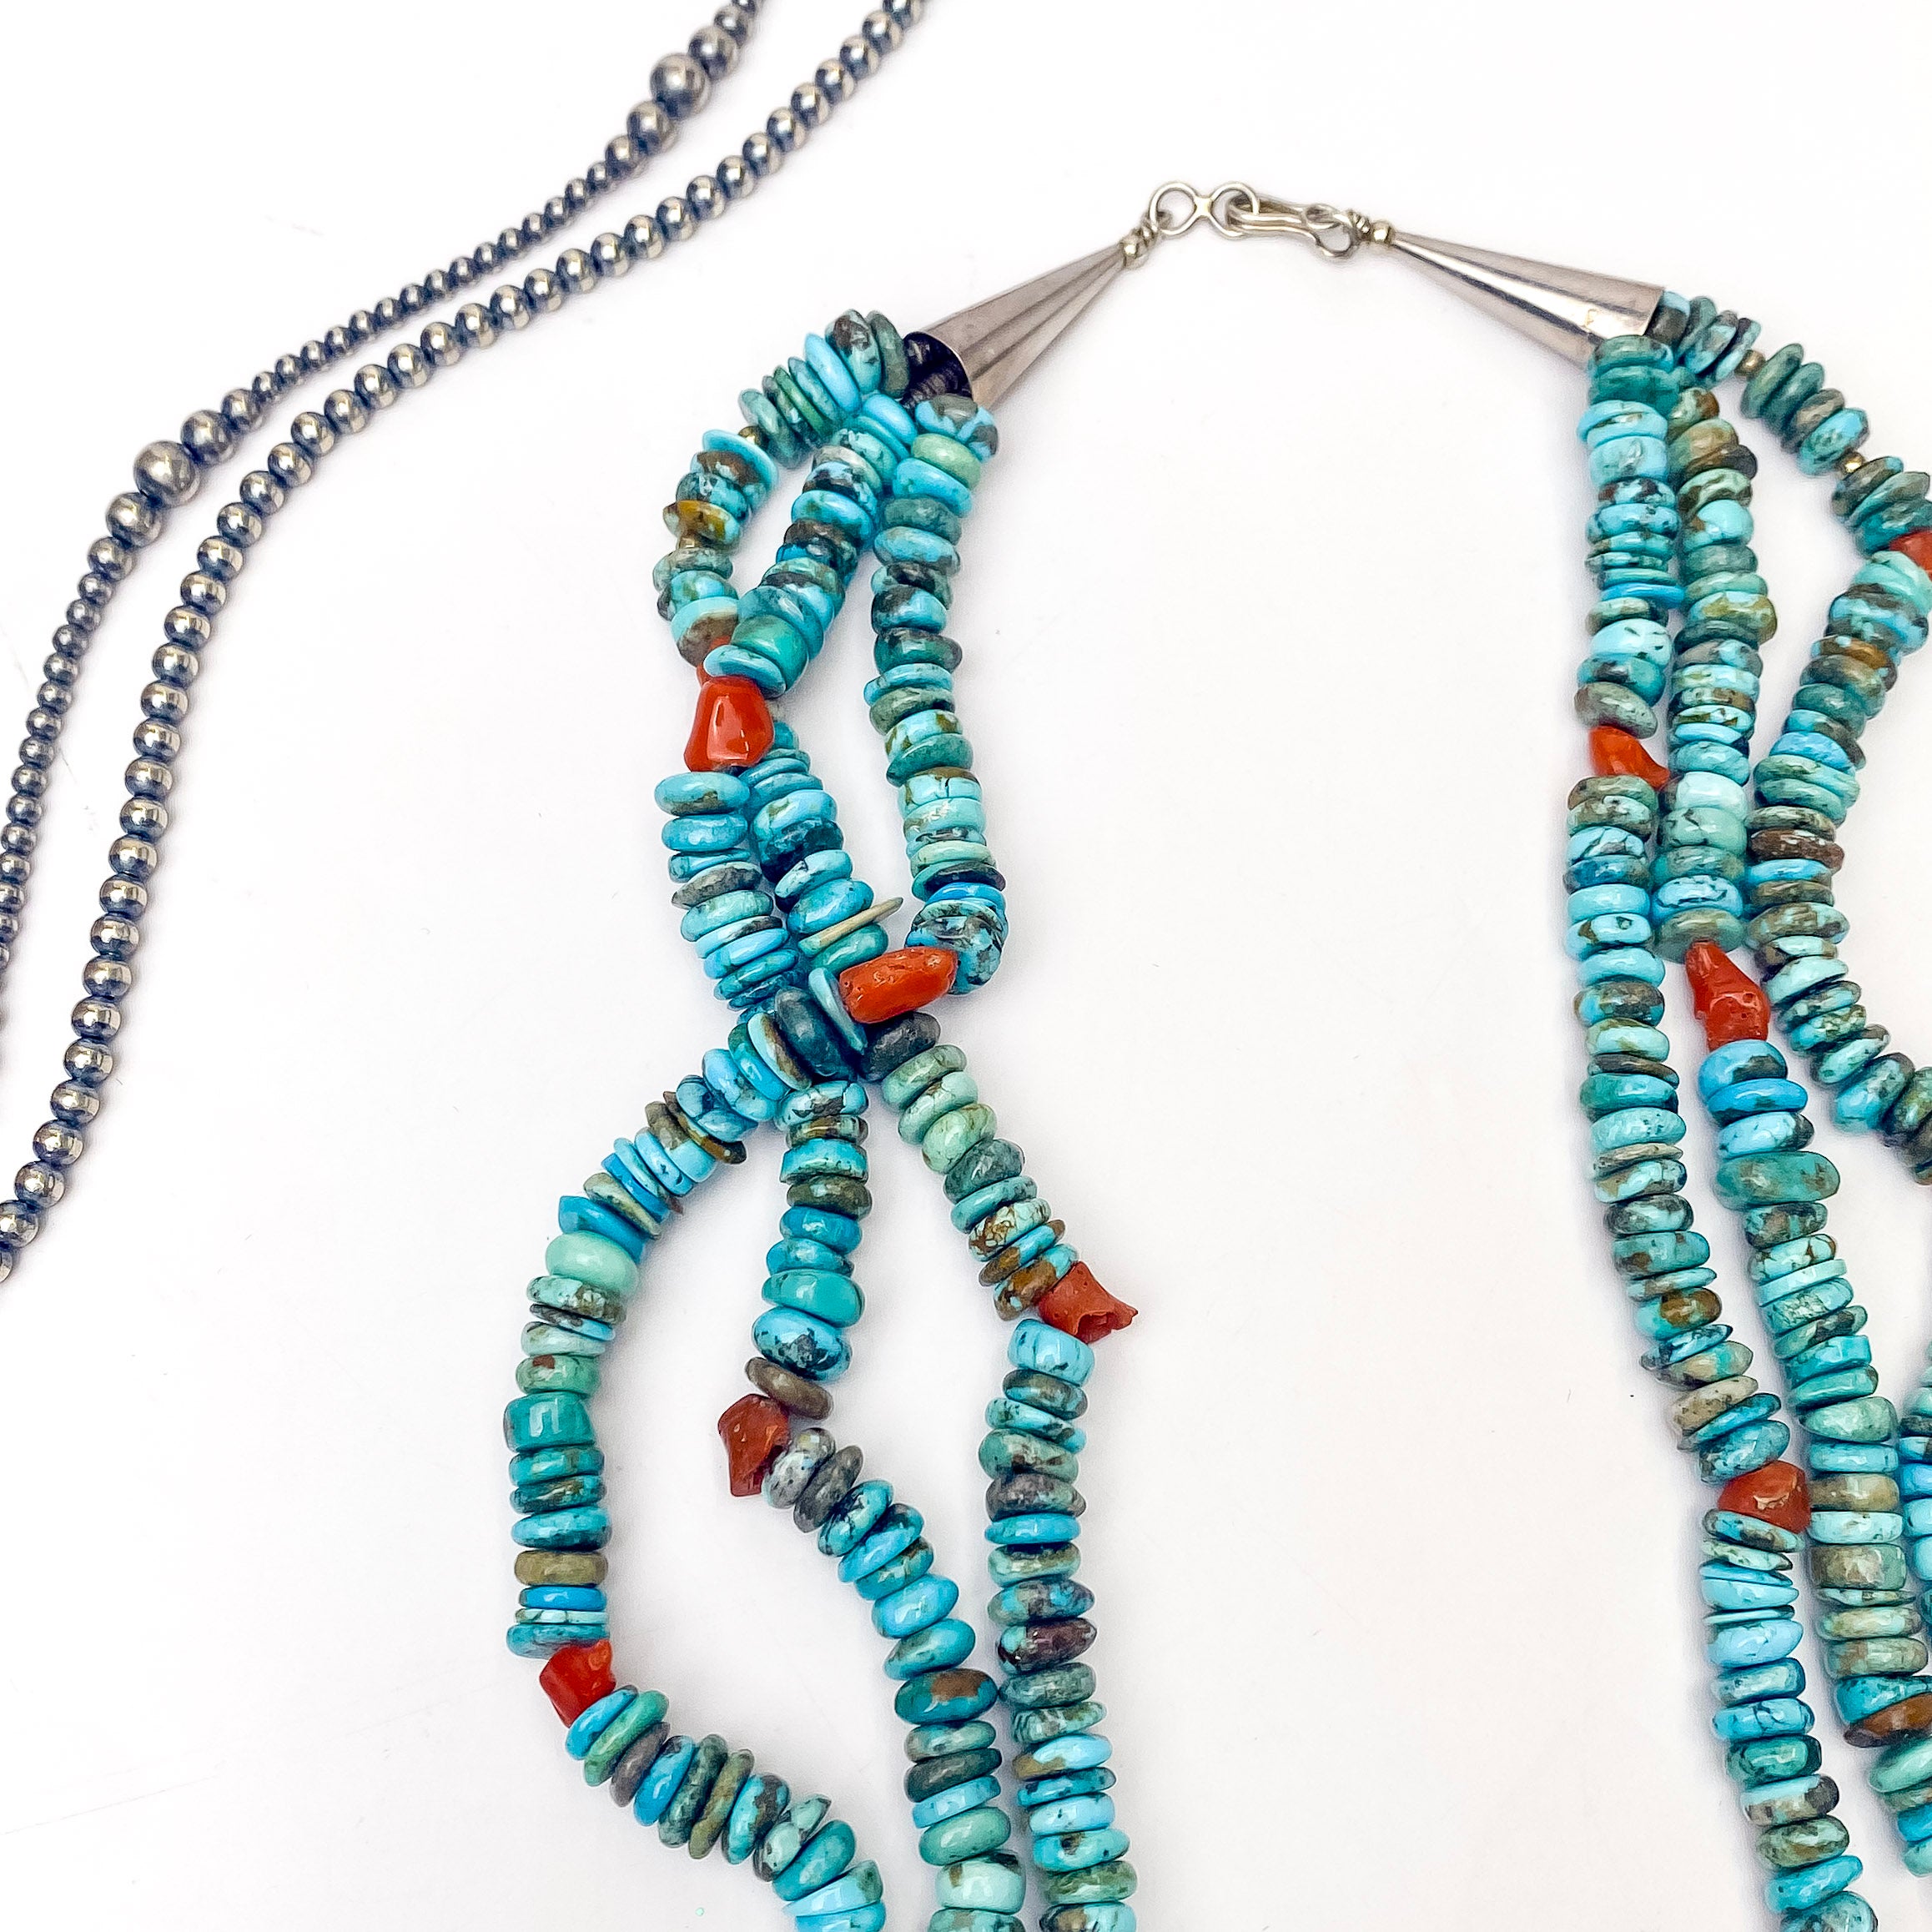 Navajo | Navajo Handmade Three Strand Necklace with Natural Turquoise and Coral Stones - Giddy Up Glamour Boutique